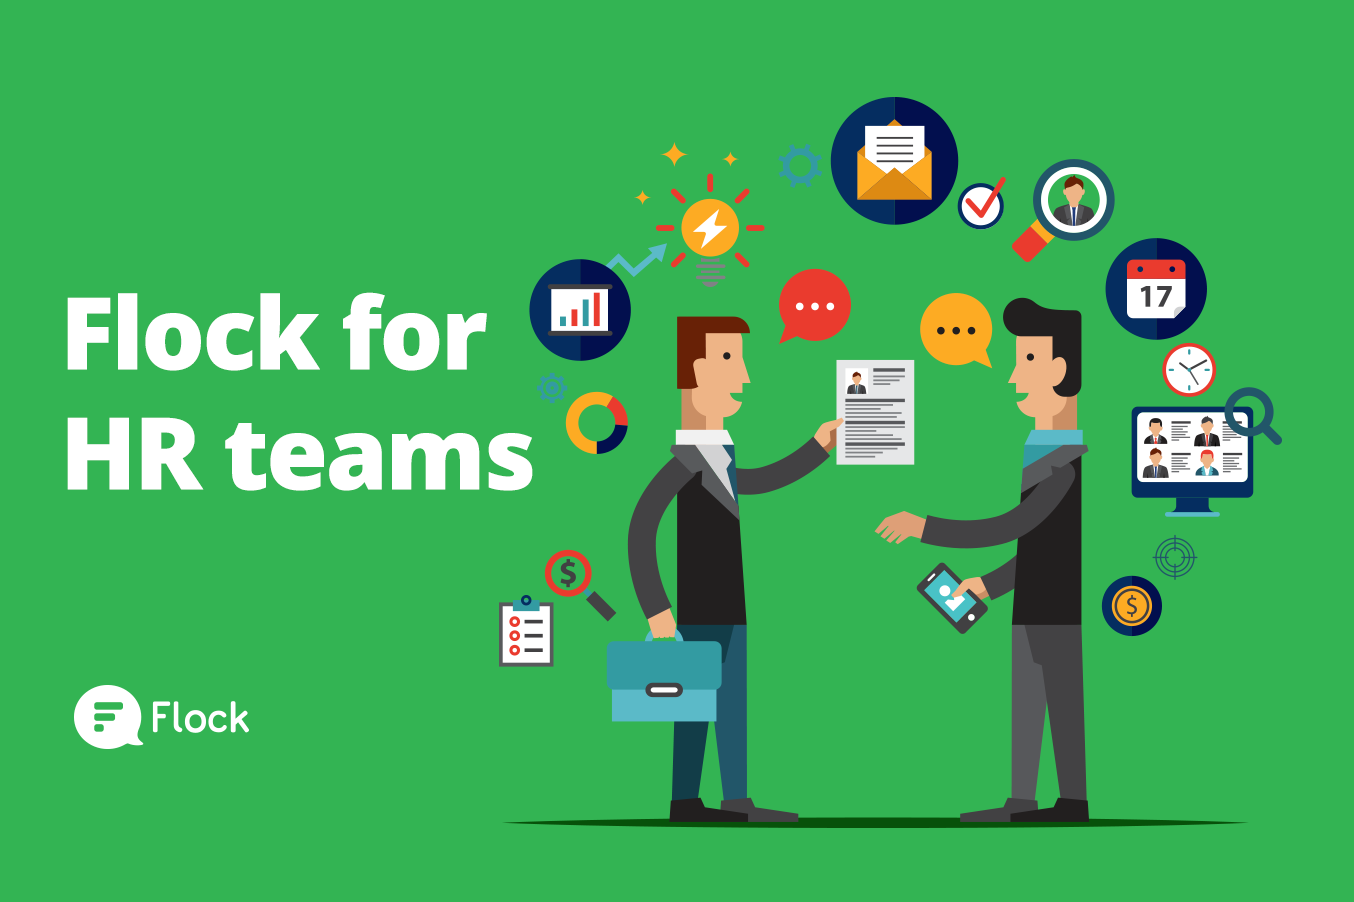 Graphic: Flock for HR teams